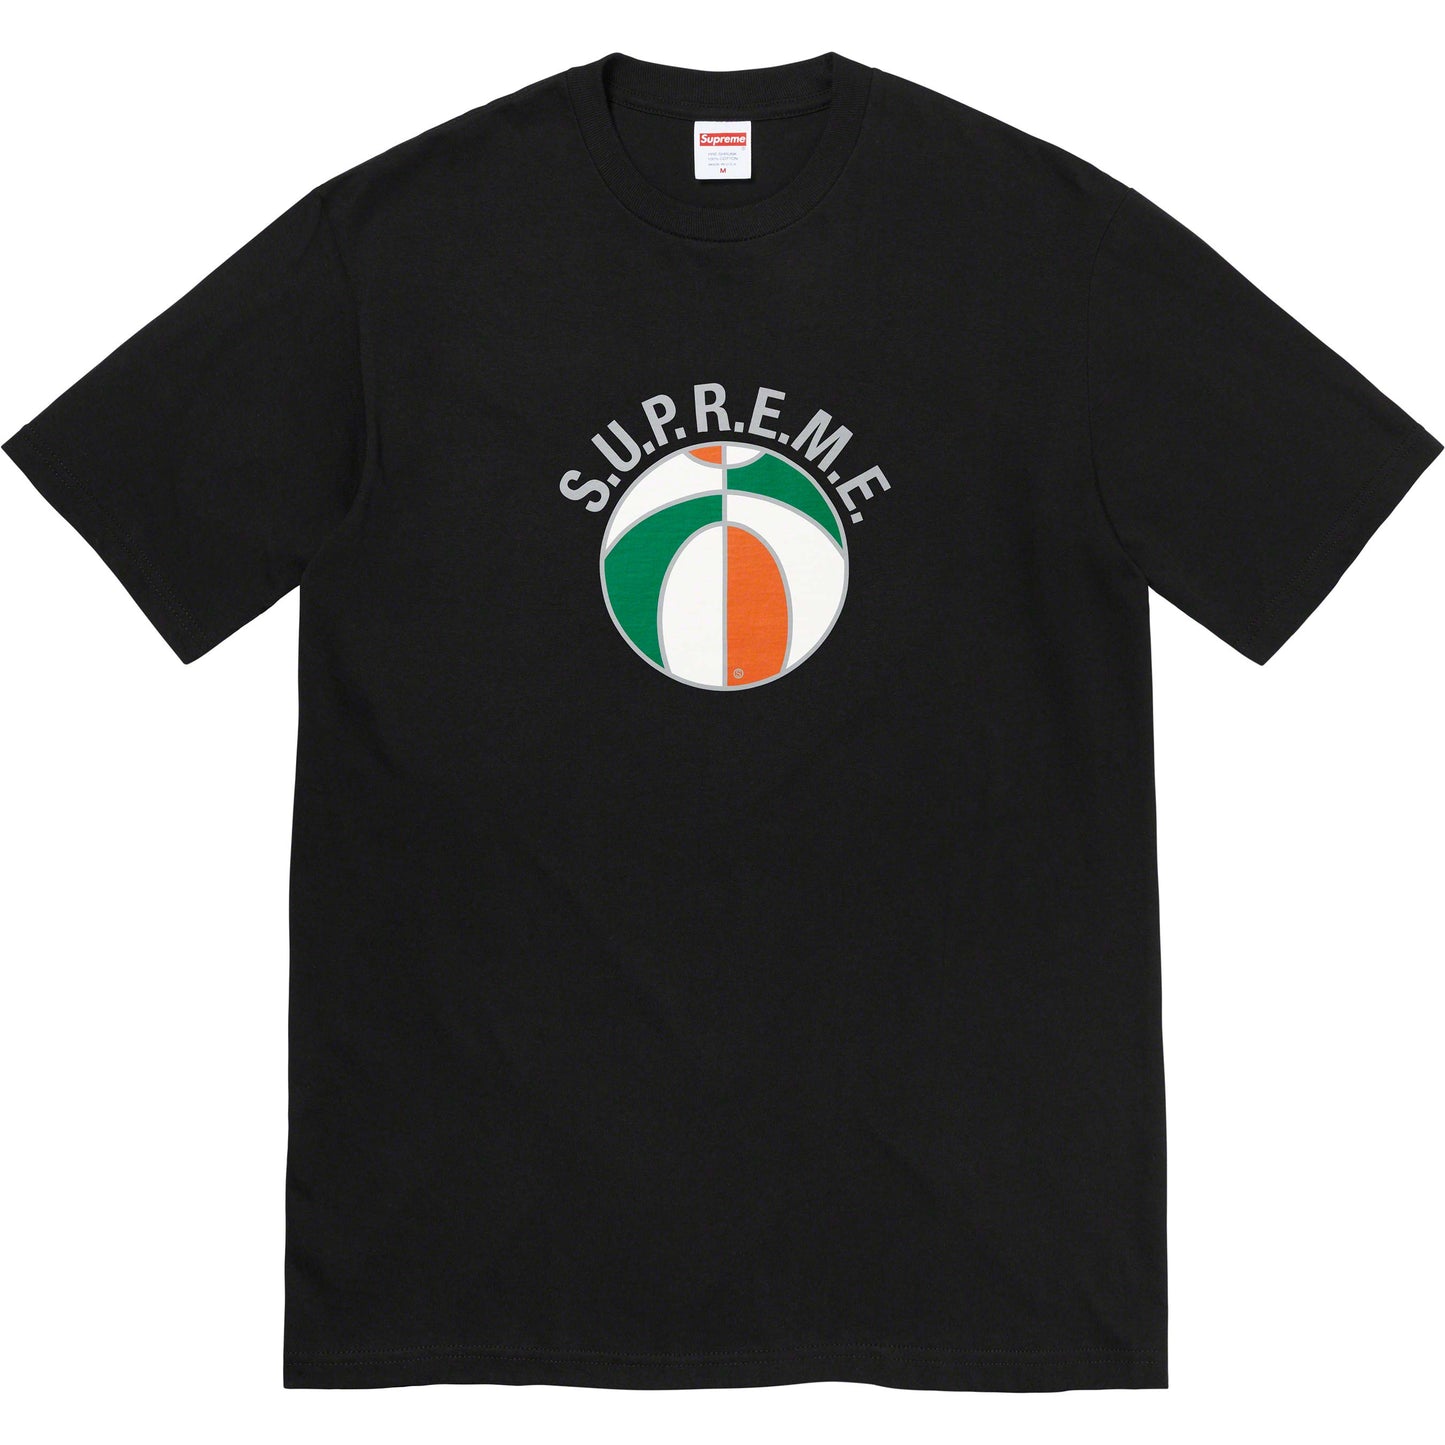 Supreme League Tee Black by Supreme from £80.00